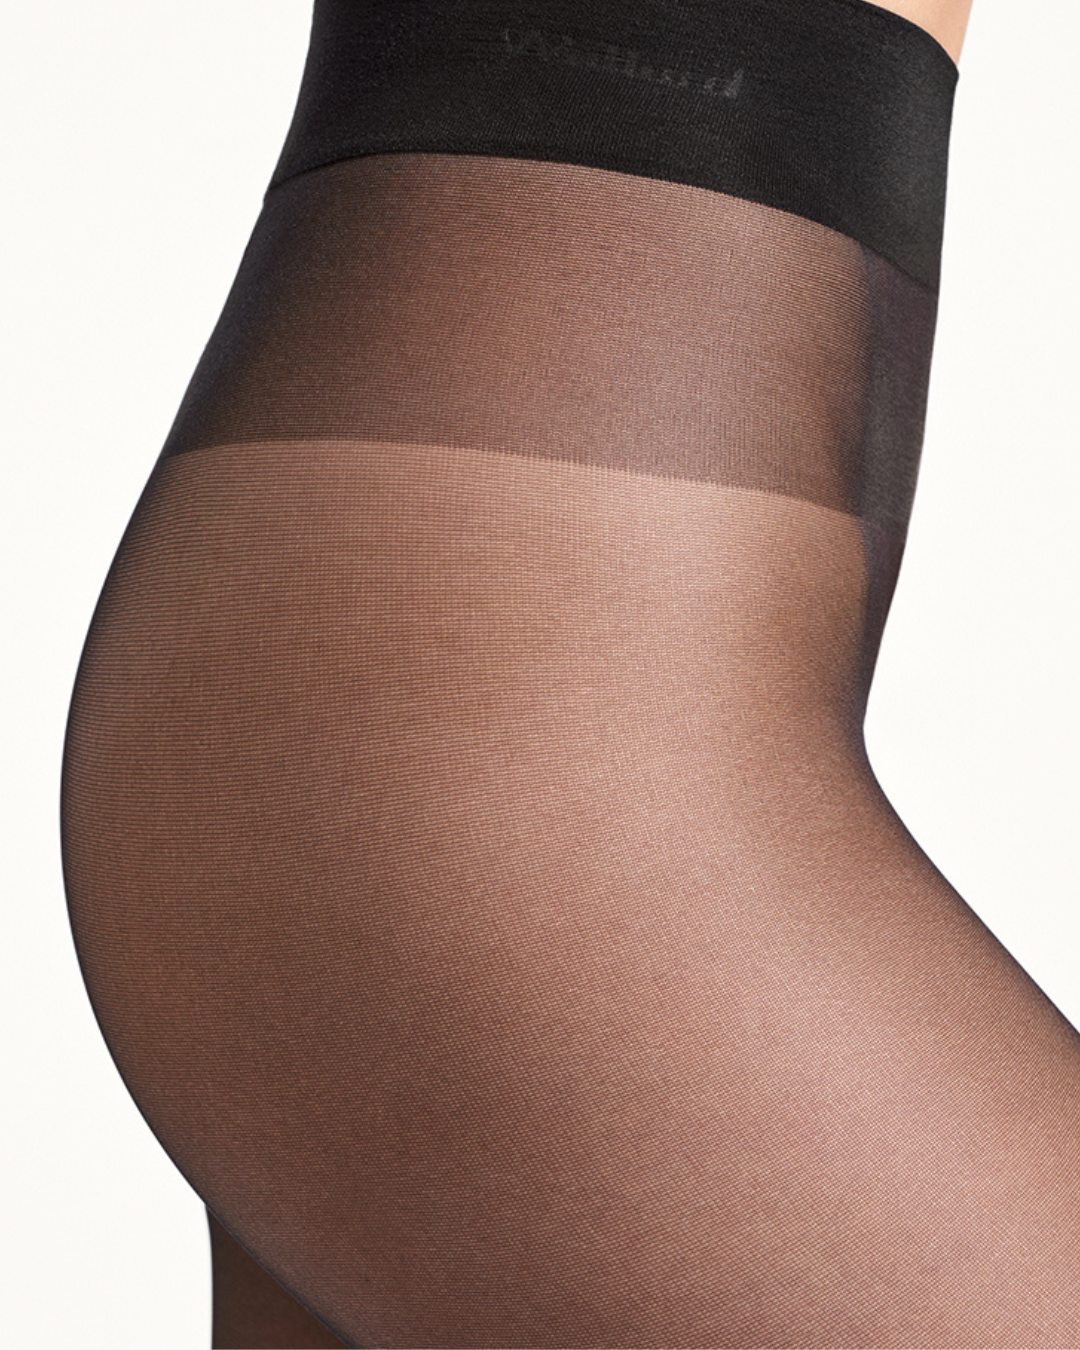 Satin Touch 20 Tights - Black